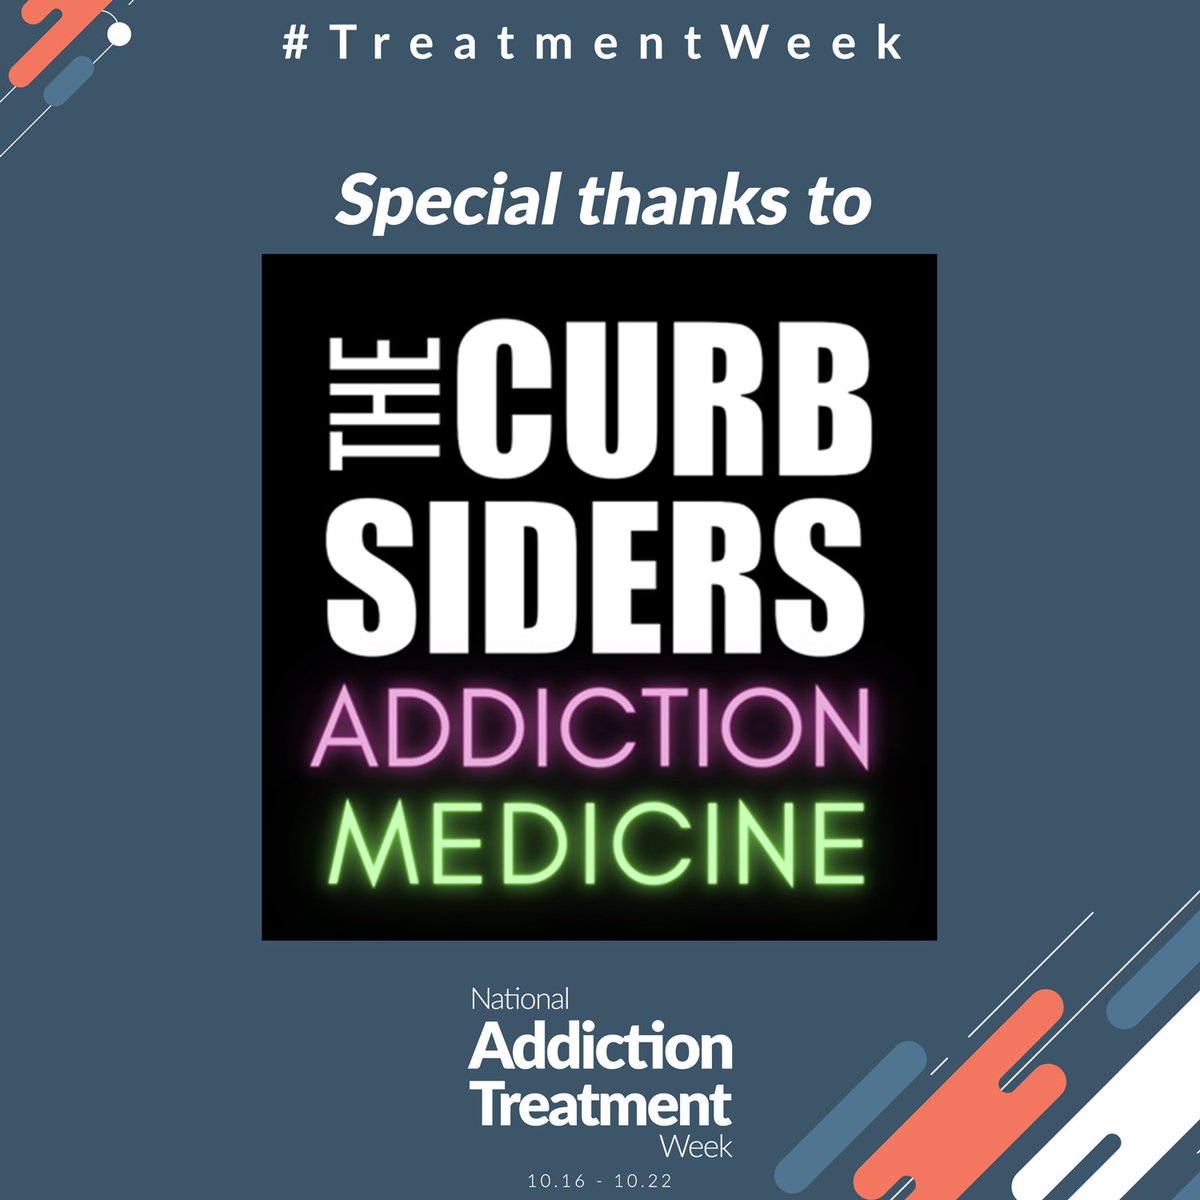 And much gratitude to @thecurbsiders for their amazing support of #TreatmentWeek!

#NATW #AddictionMedicine #AddictionTreatment #NationalAddictionTreatmentWeek #ASAM #TreatAddictionSaveLives